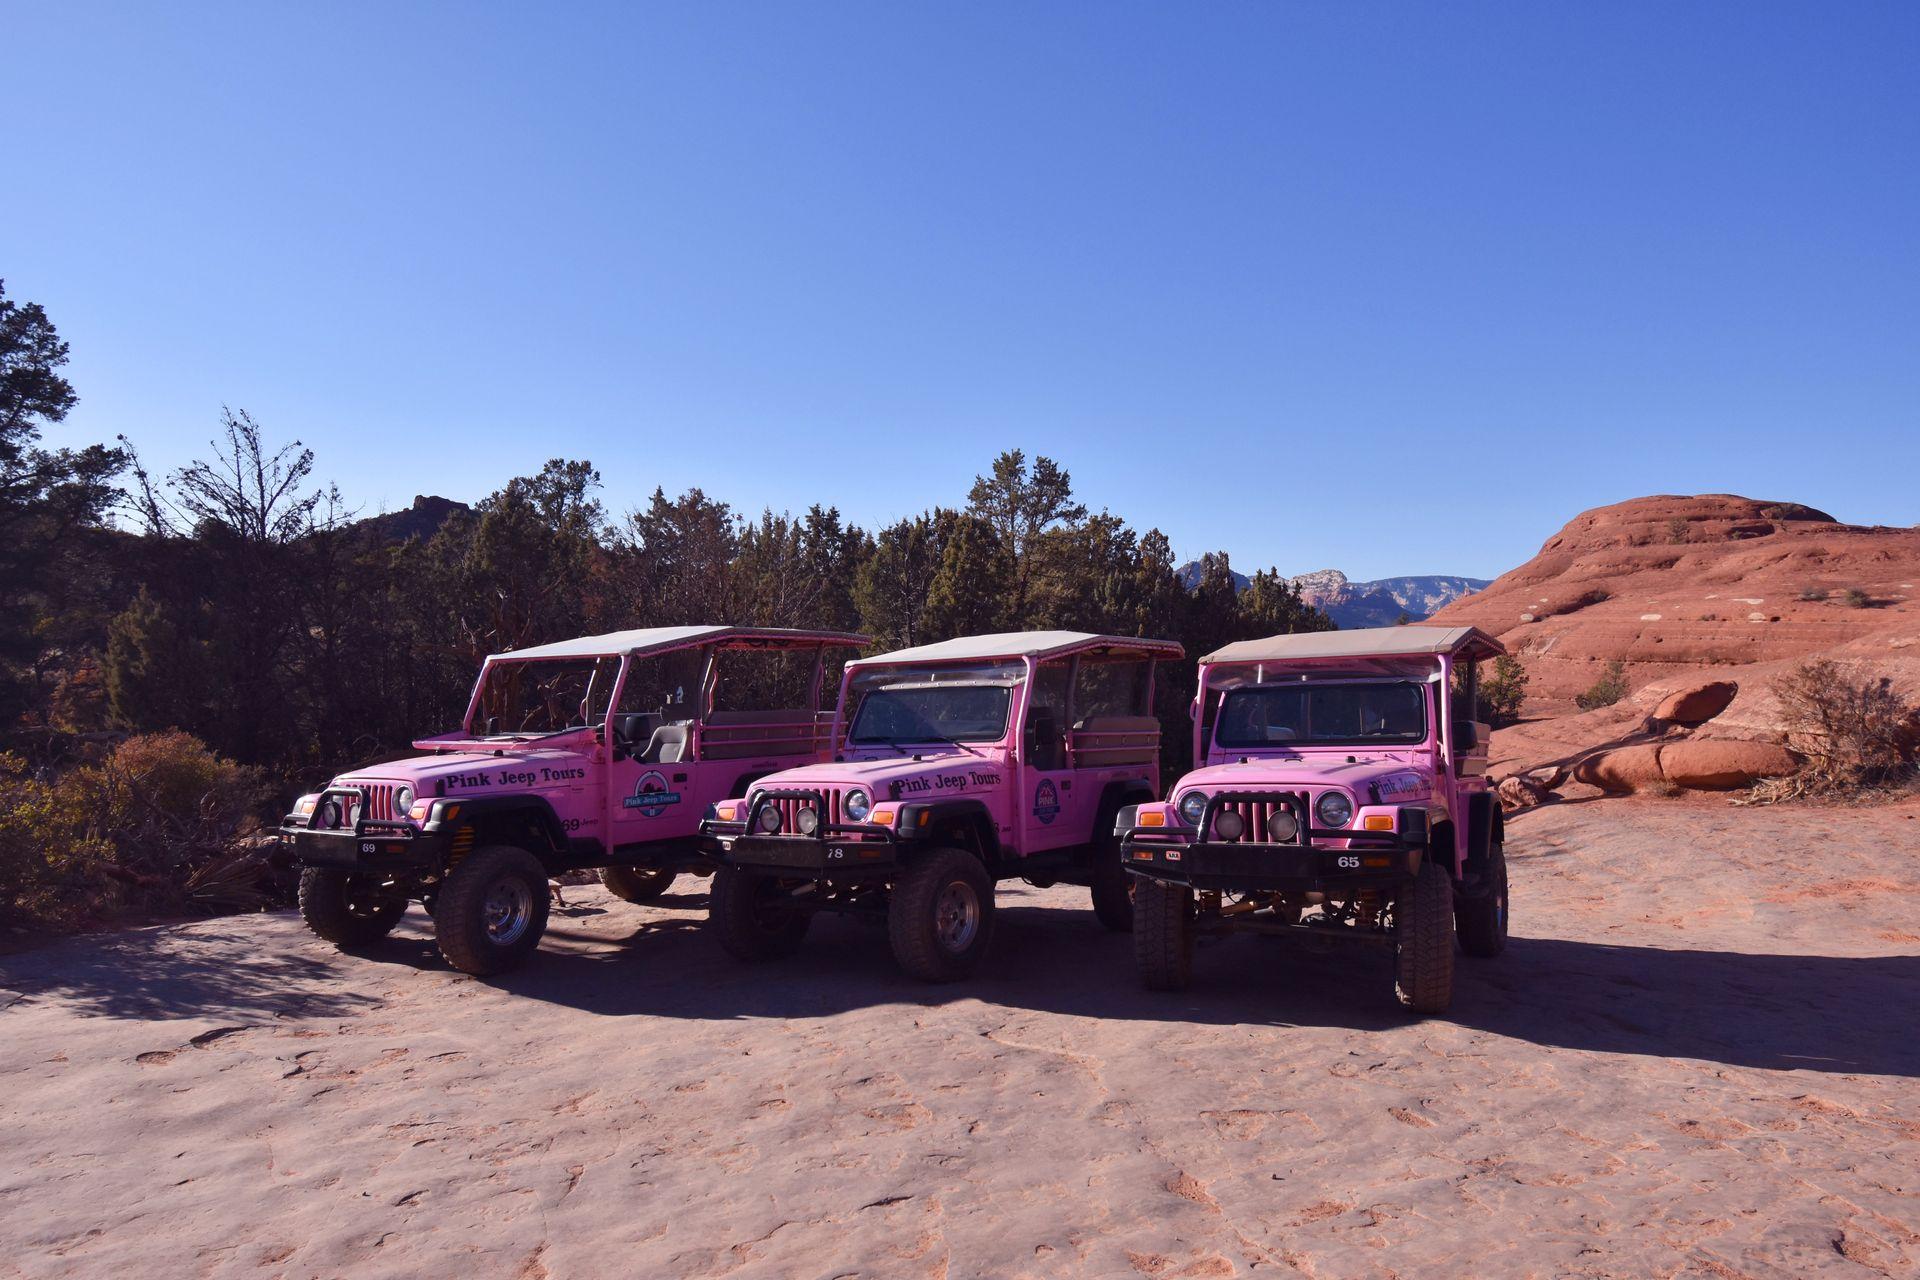 Three pink jeeps parked next to each other during the Broken Arrow Pink Jeep tour.